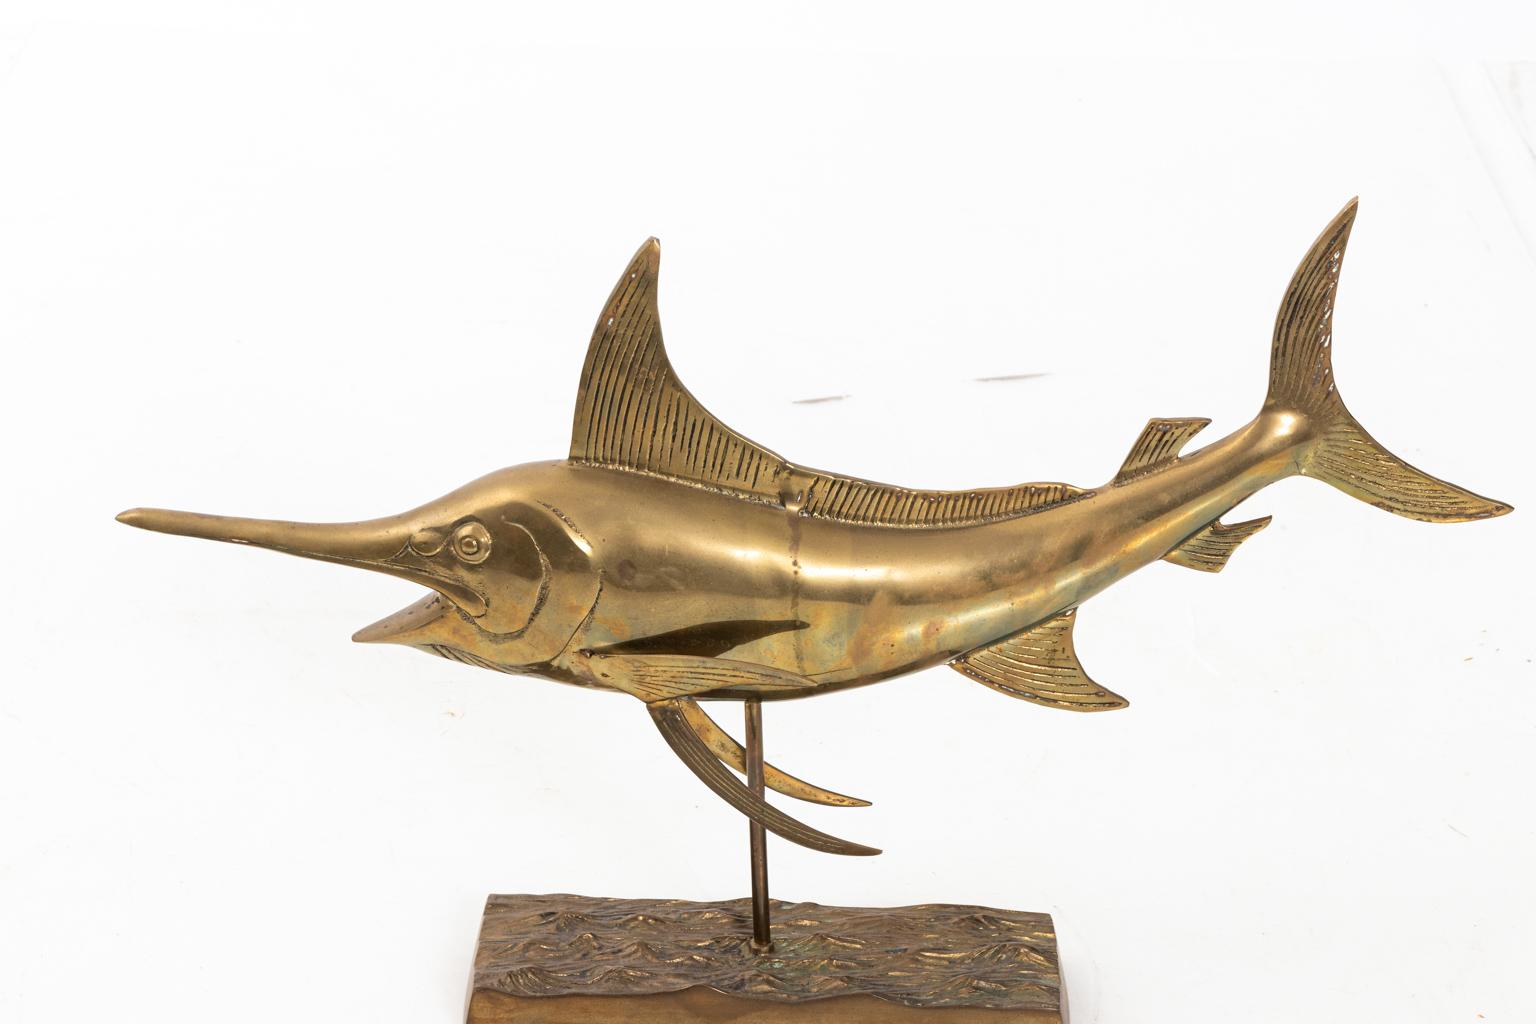 Large scale brass full body sail fish sculpture mounted on a rectangular brass base, circa 1970s. Please note of wear consistent with age including patina to finish. Made in the United States.